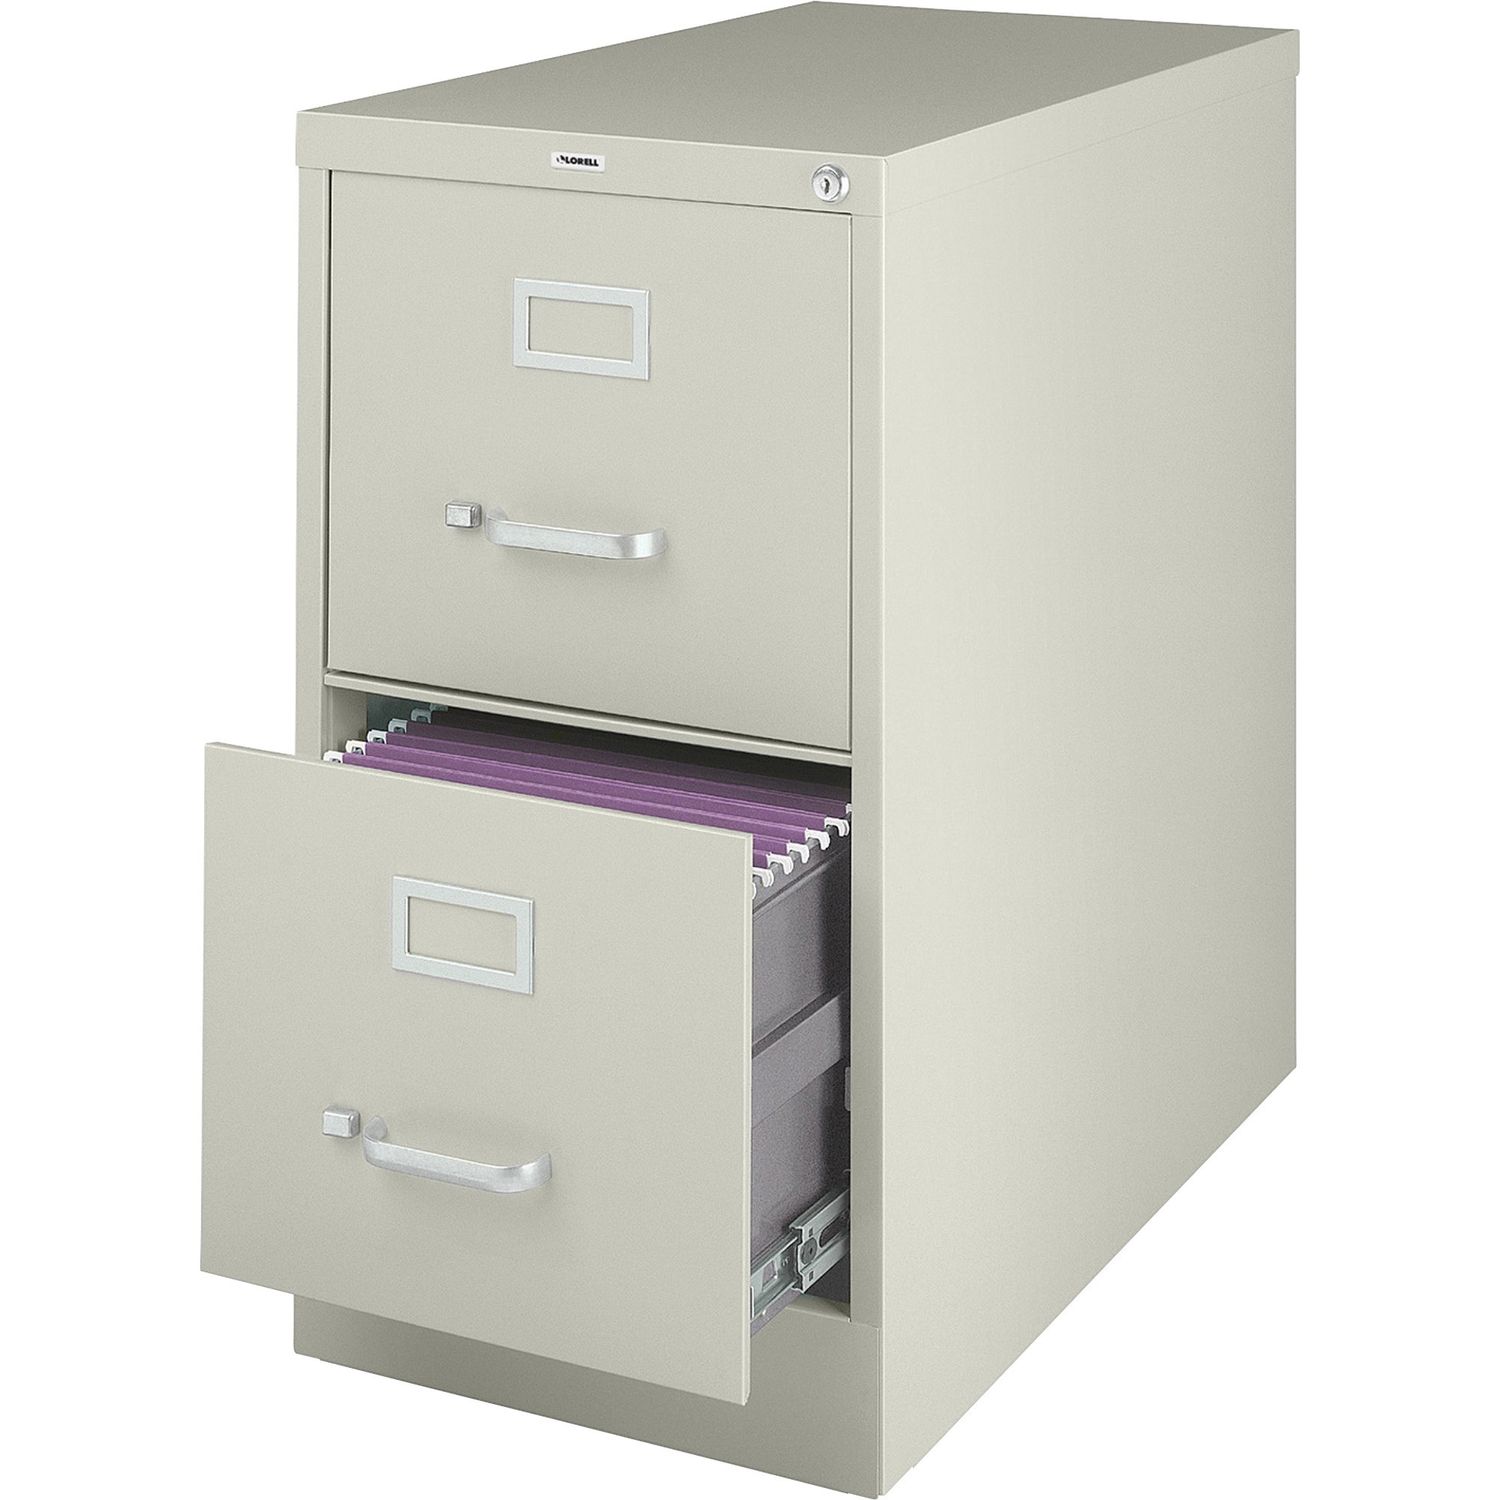 Vertical file - 2-Drawer 15" x 25" x 28.4", 2 x Drawer(s) for File, Letter, Vertical, Security Lock, Ball-bearing Suspension, Heavy Duty, Putty, Steel, Recycled